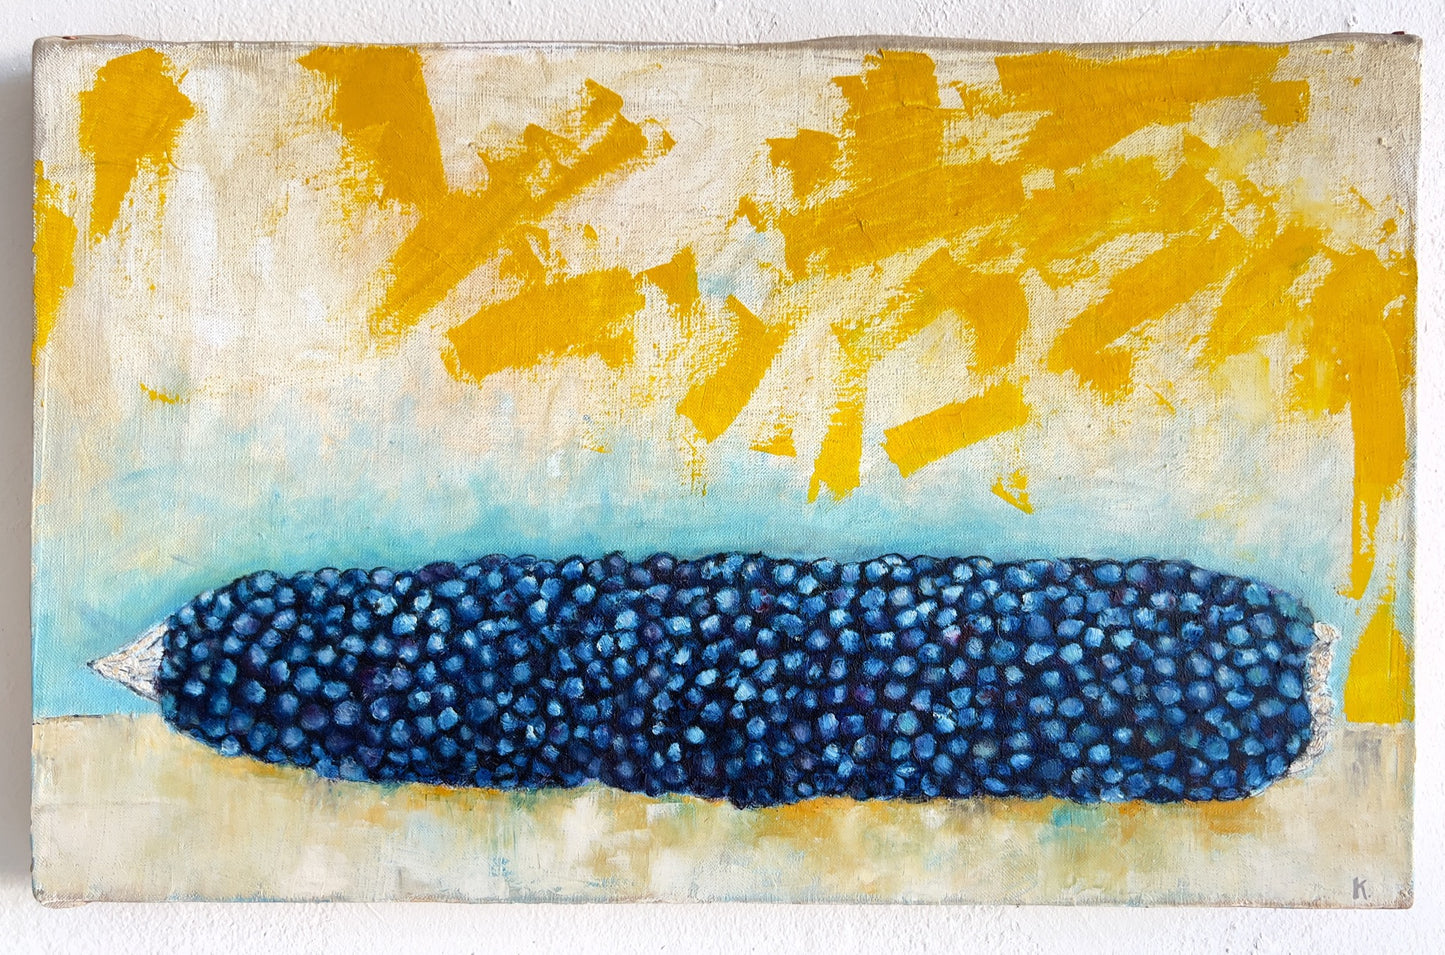 Blue Corn- Painting by Kyle Parker Cunningham